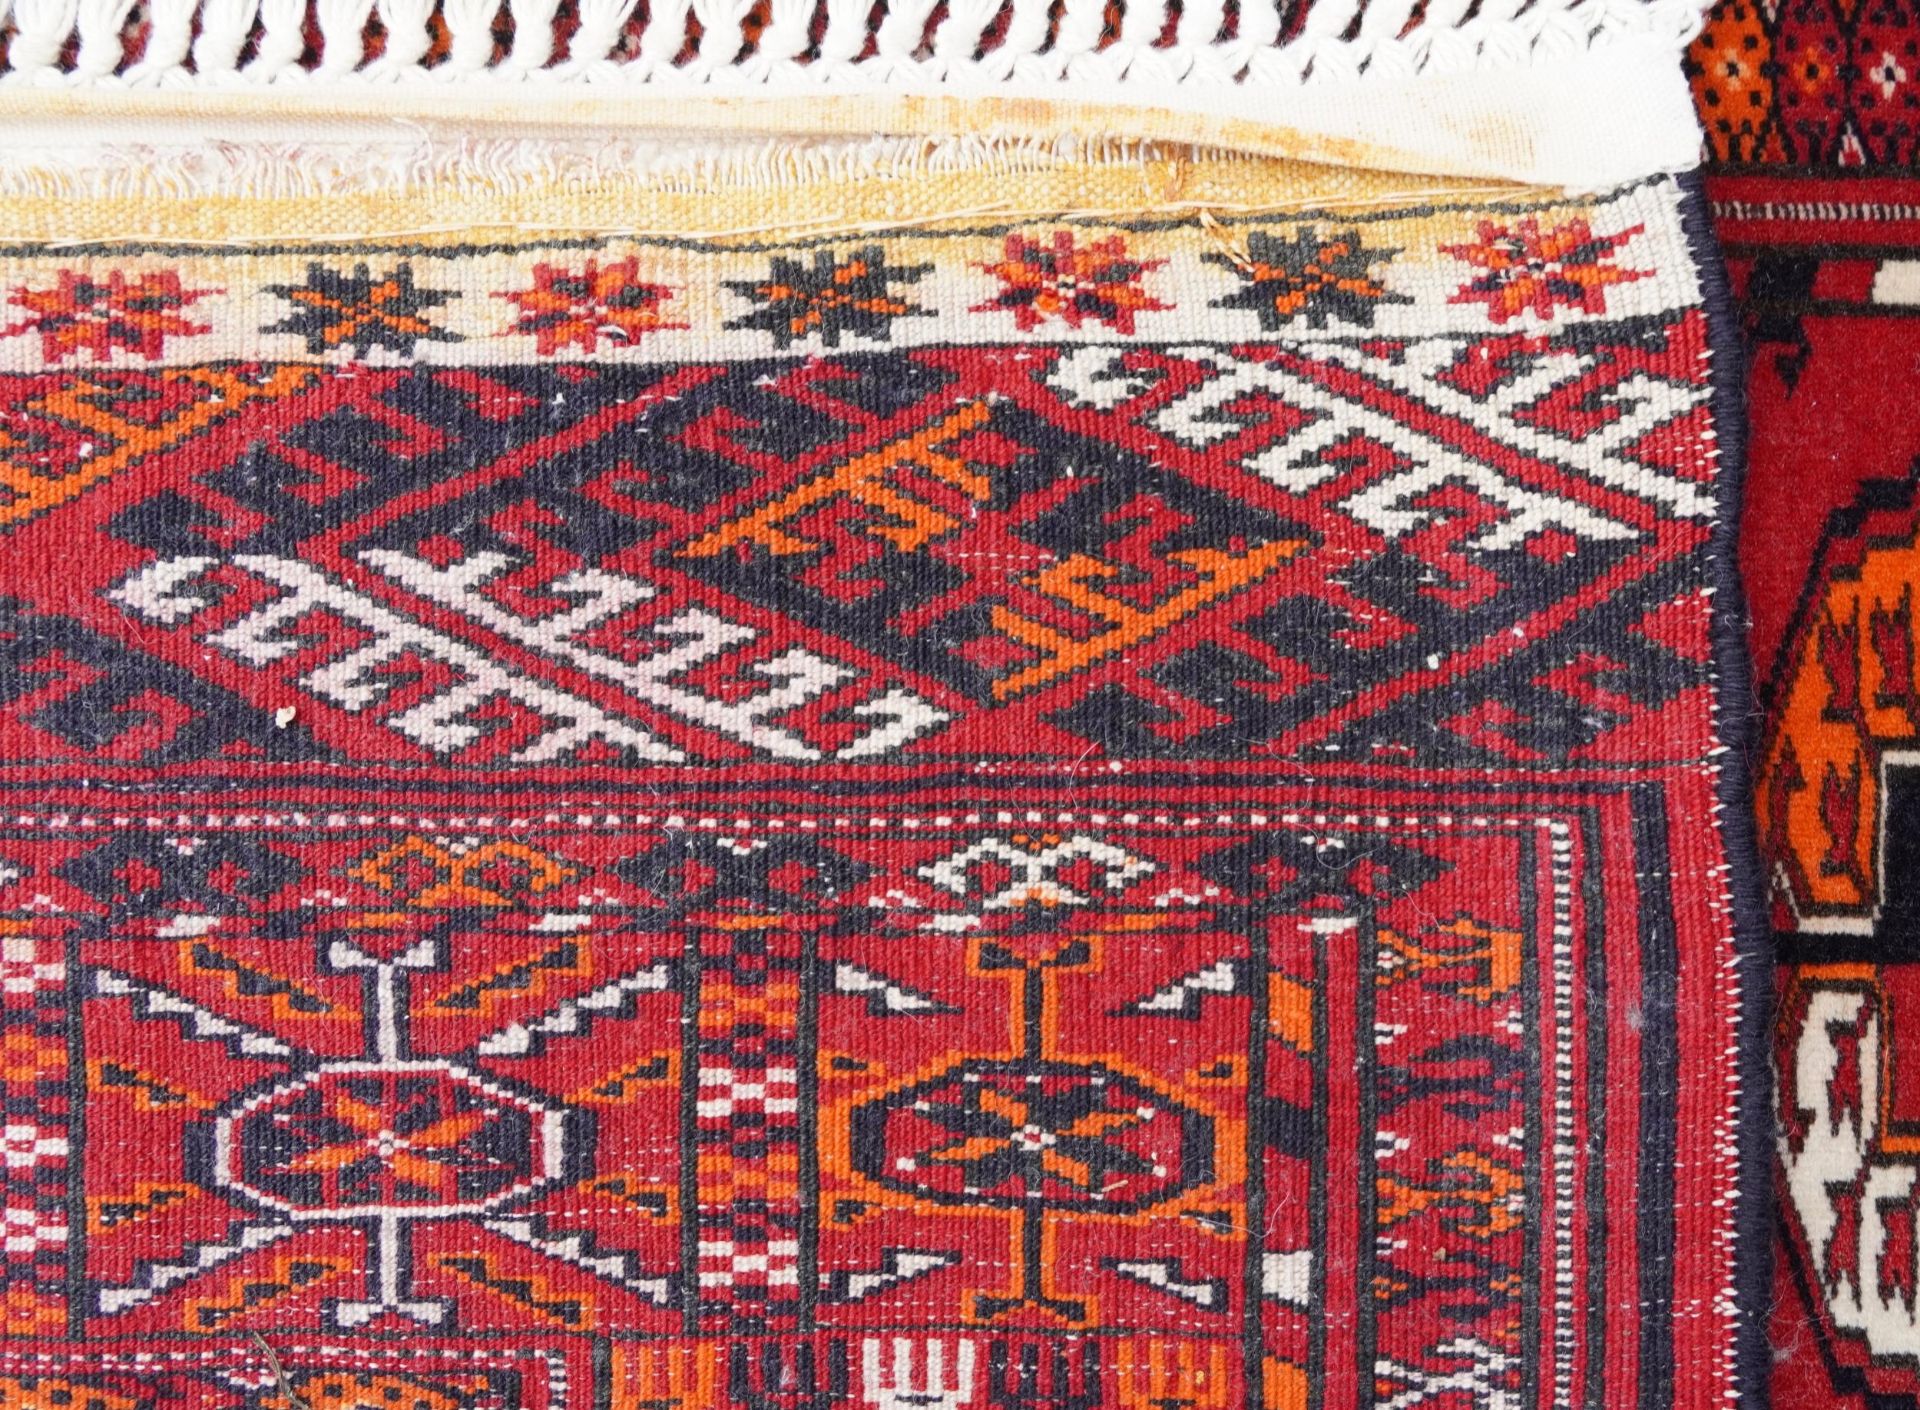 Rectangular Persian red ground rug having an allover repeat design, 170cm x 120cm : For further - Image 4 of 4